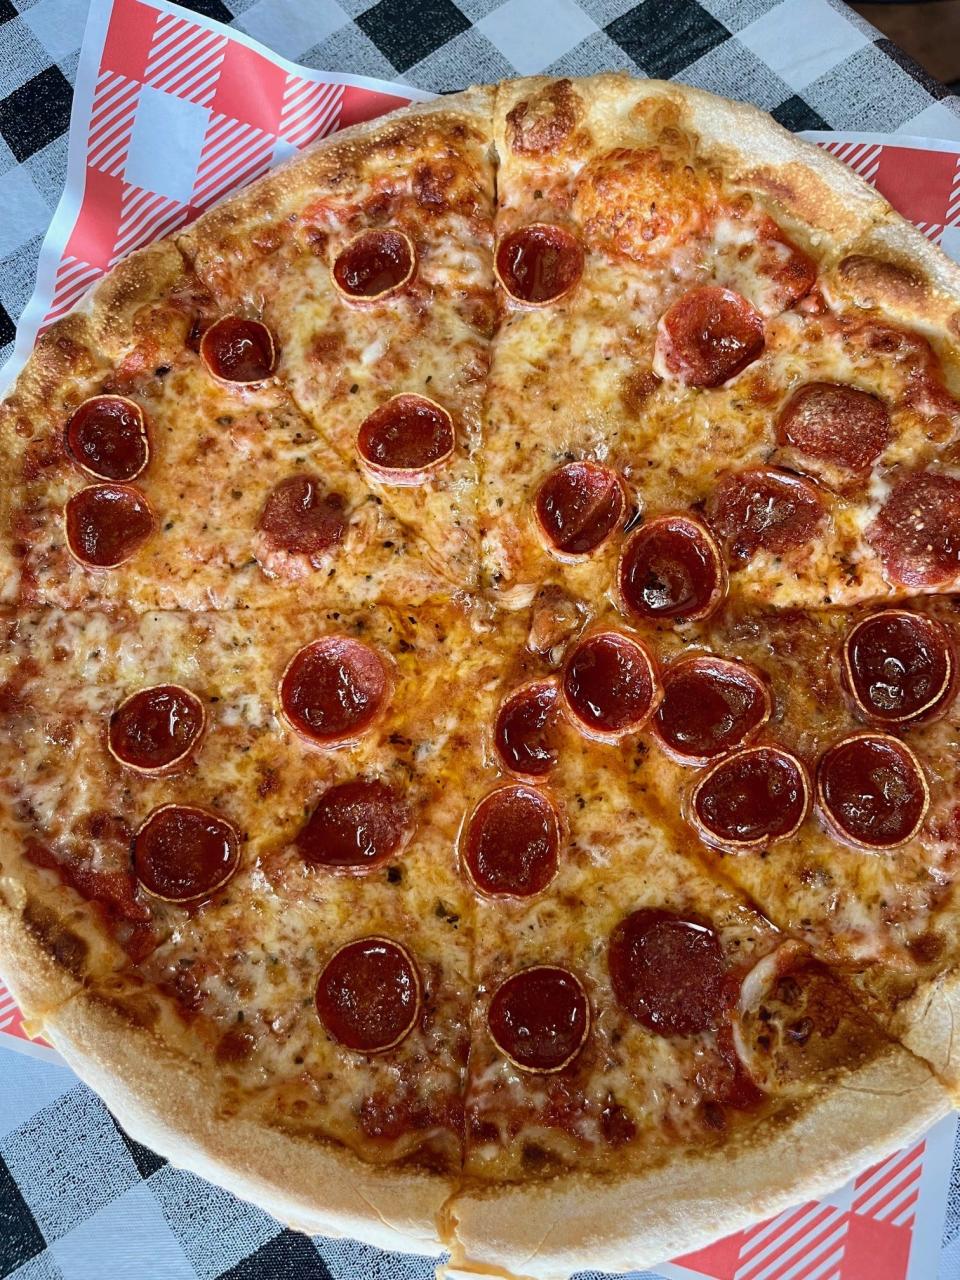 Pepperoni is a top-seller at Tony's New York Pizza & Pasta in Fort Myers.